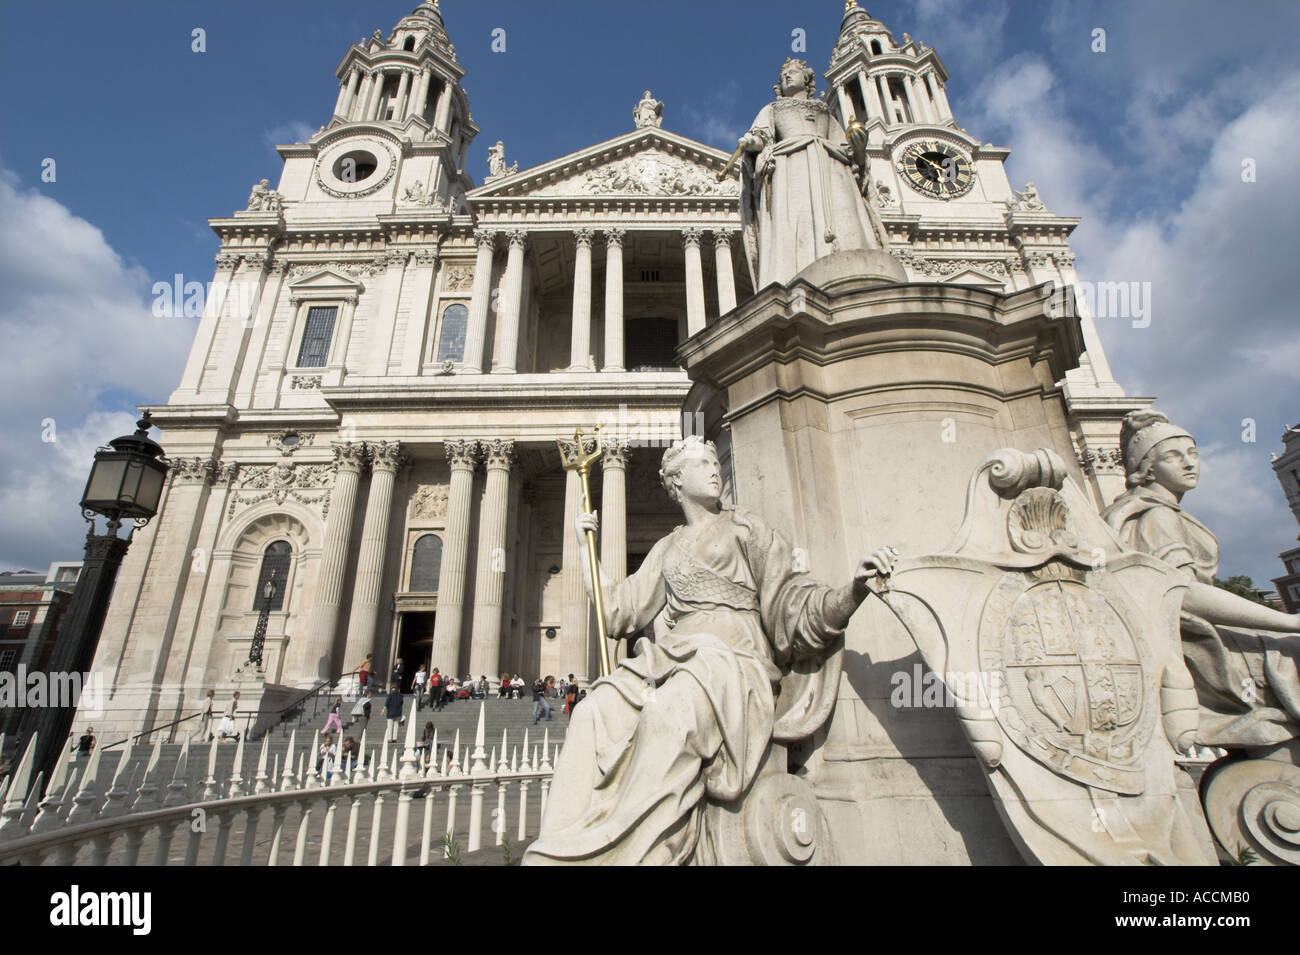 A different view of St Pauls Cathedral in London England Stock Photo